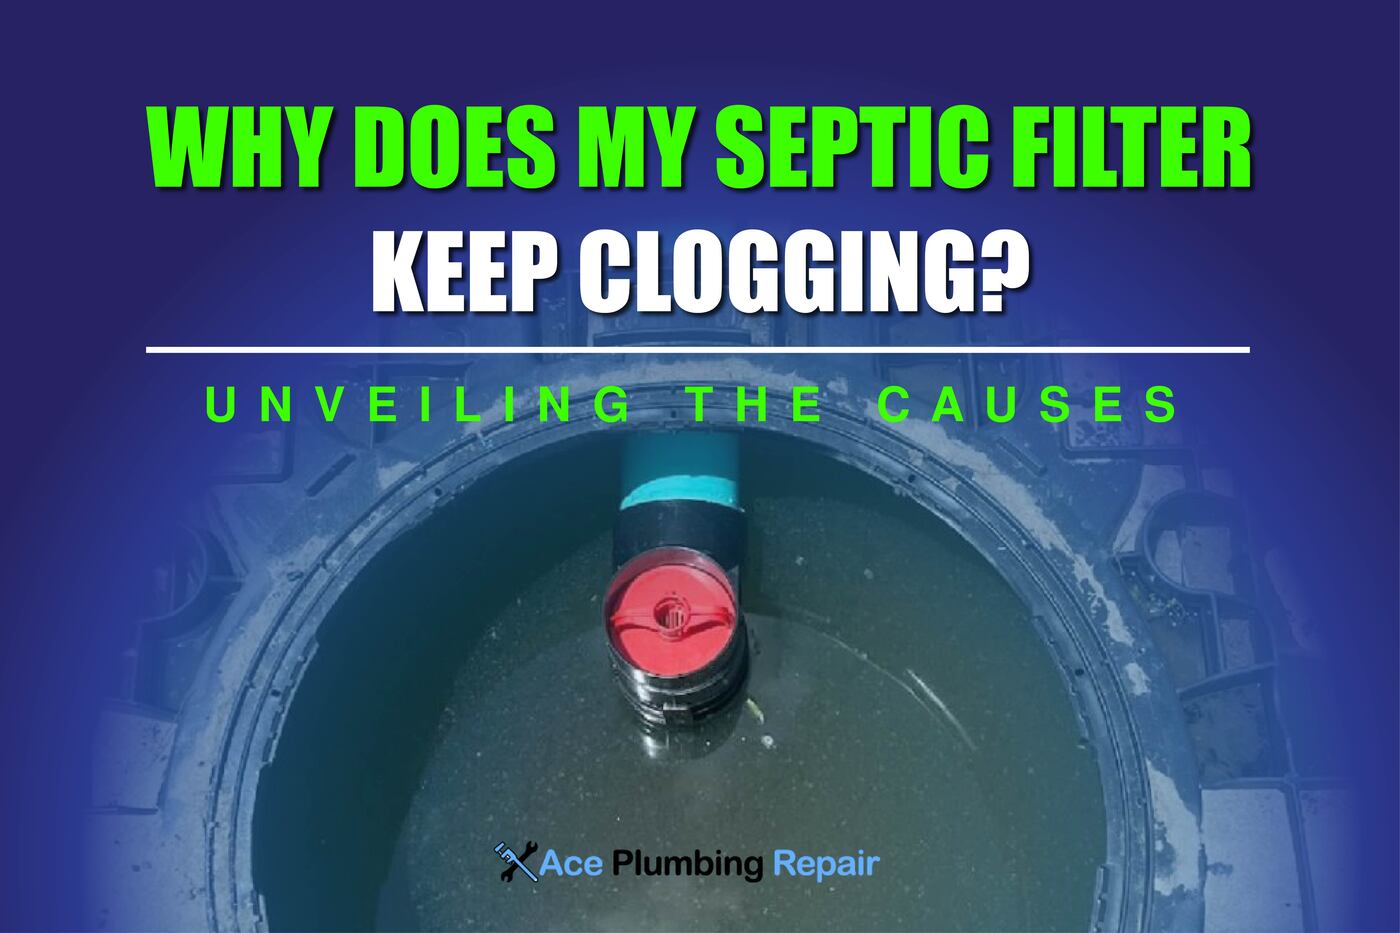 Why does my septic filter keep clogging?